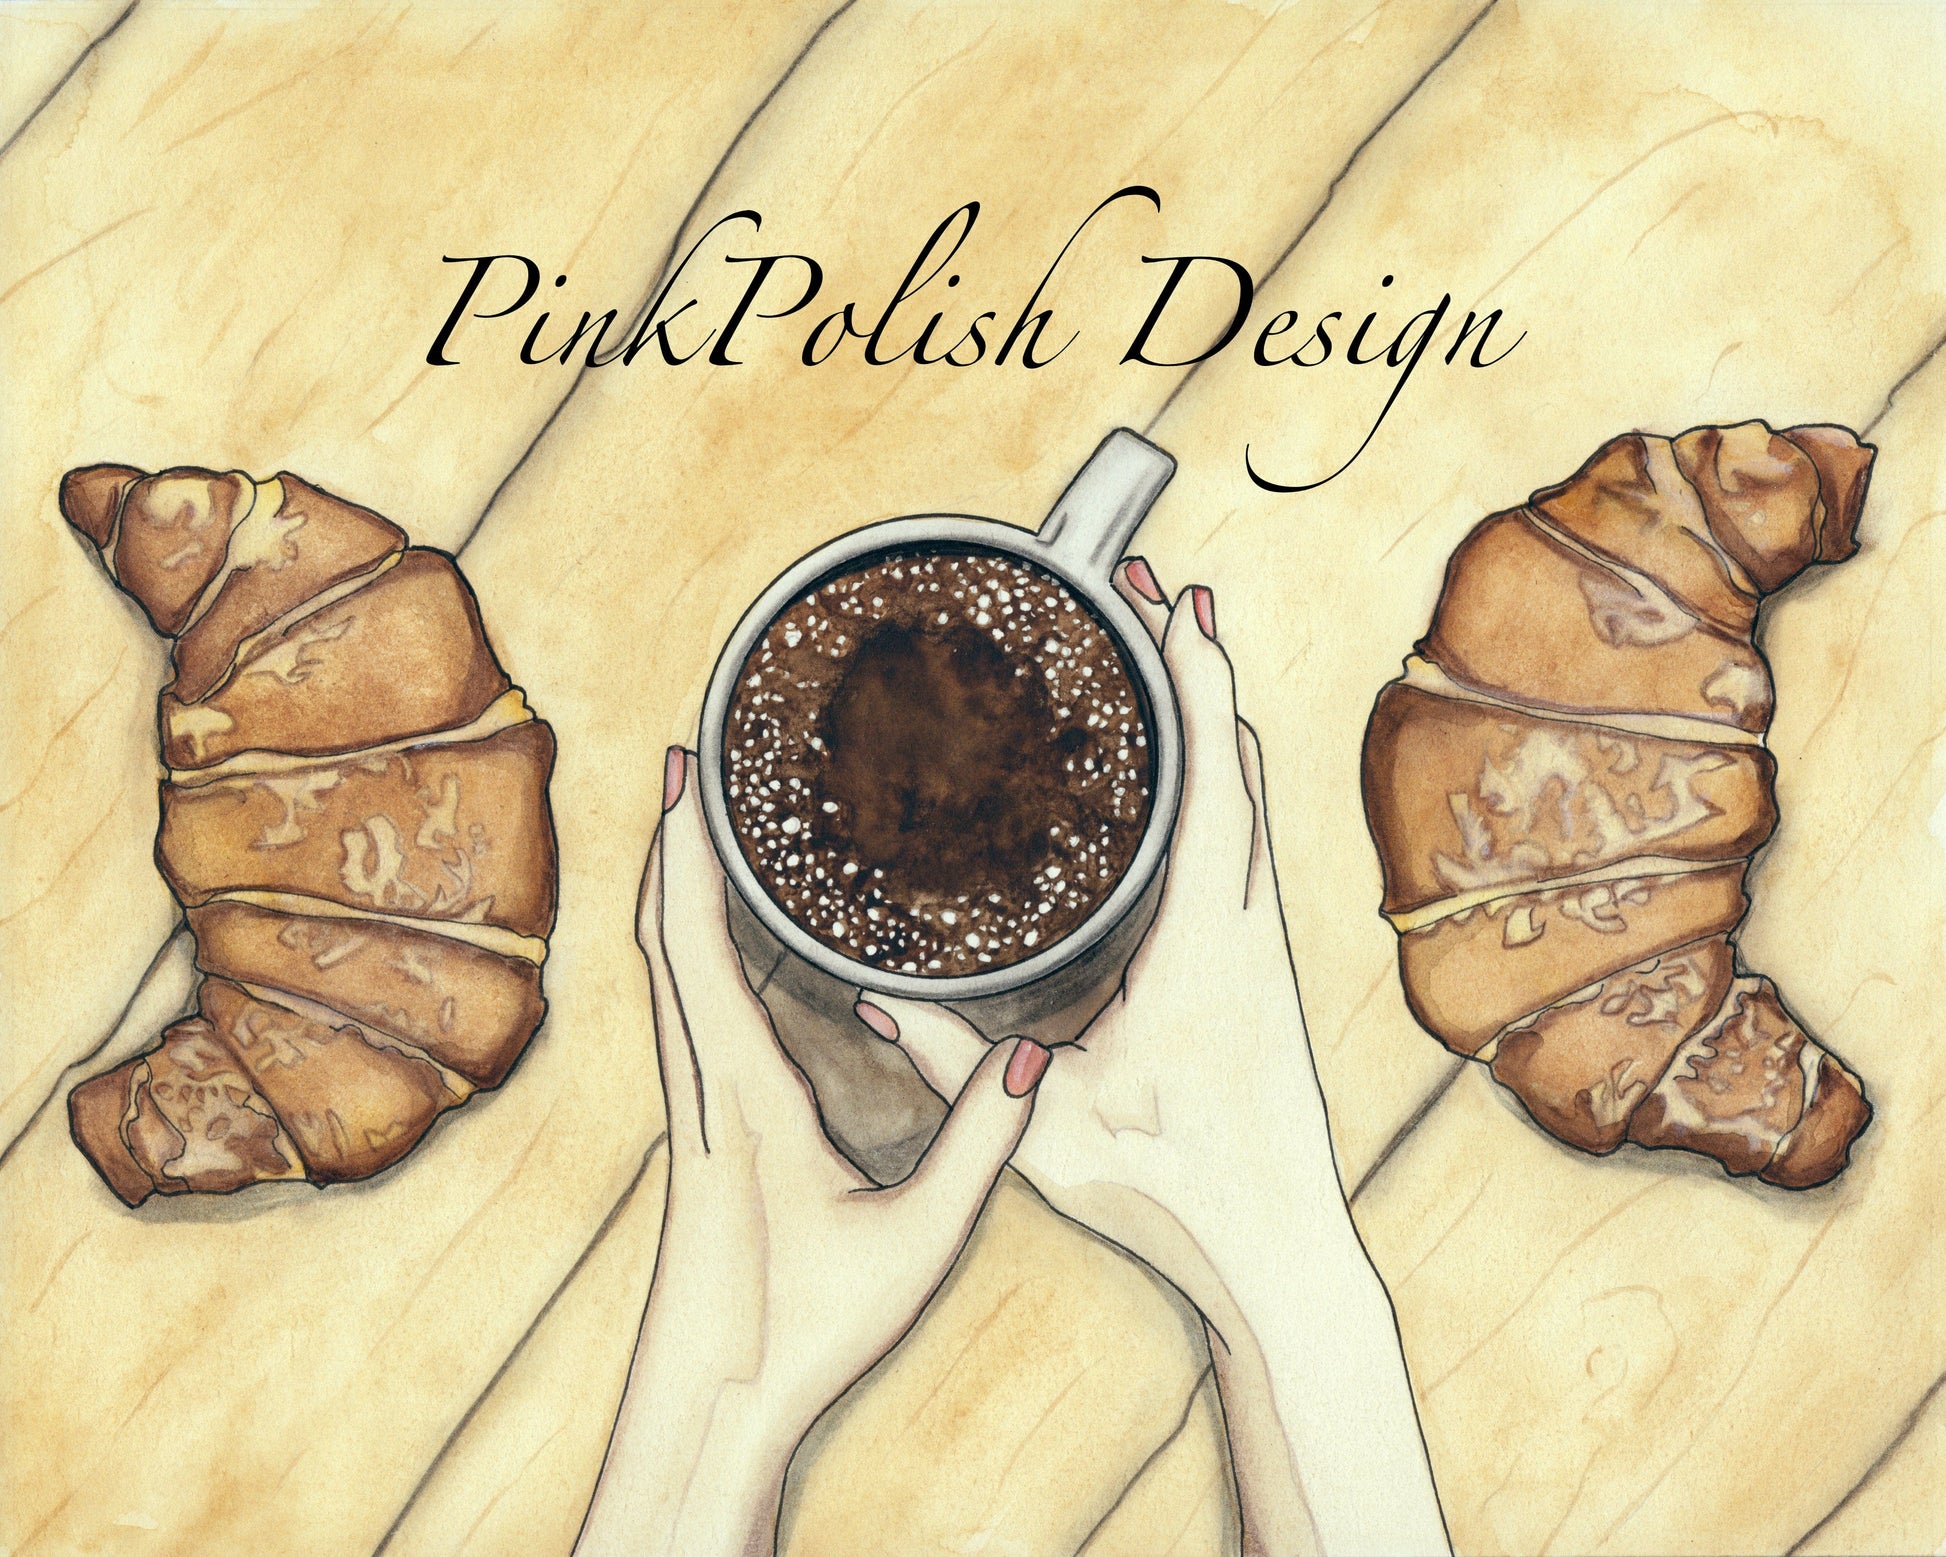 PinkPolish Design Art Prints "Moon Phases - But Coffee" Watercolor Painting: Art Print